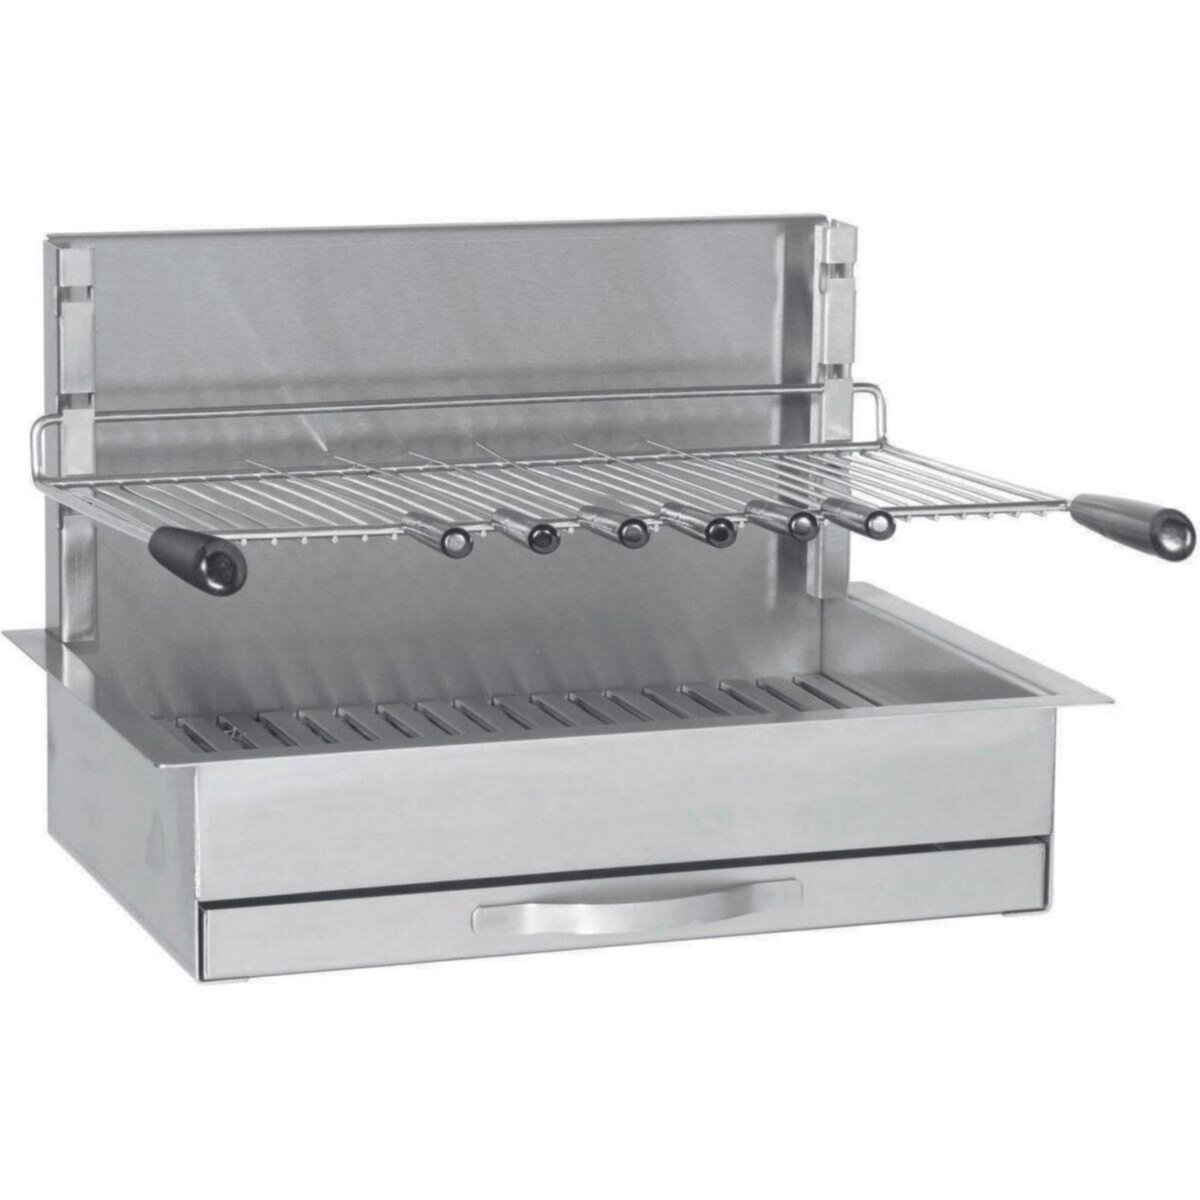 FORGE ADOUR Barbecue charbon Gril encastrable inox 961.66